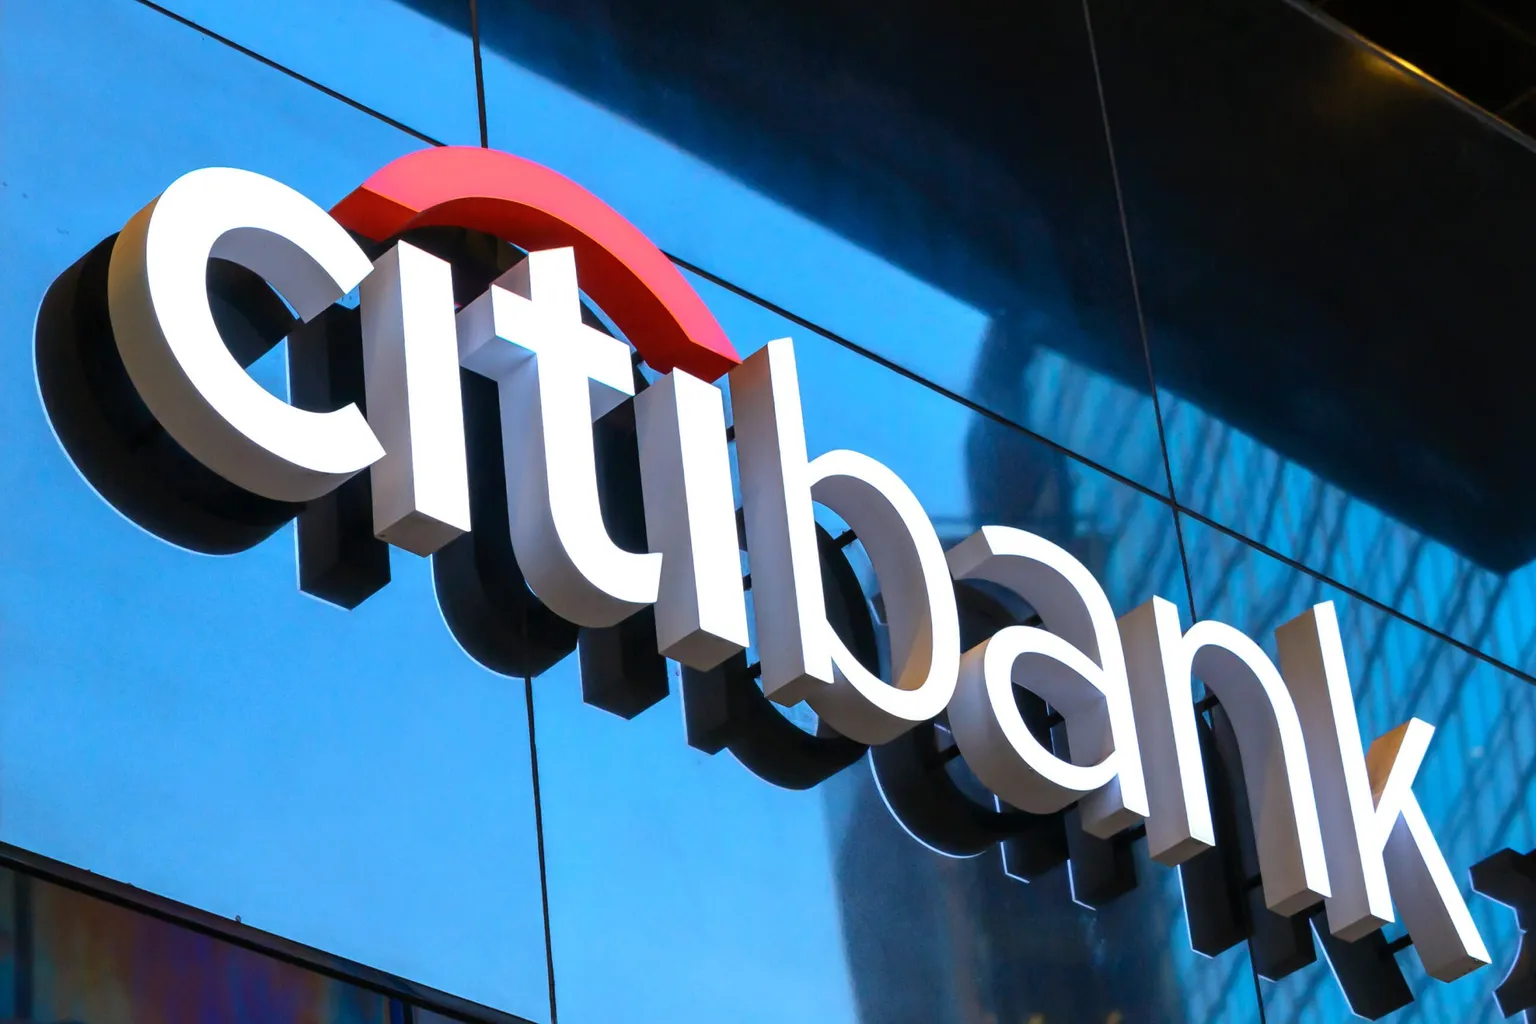 The CFO of Citi said that the death of an African-American man at the hands of the police stirred in him “horror, disgust and anger.” Image: Shutterstock